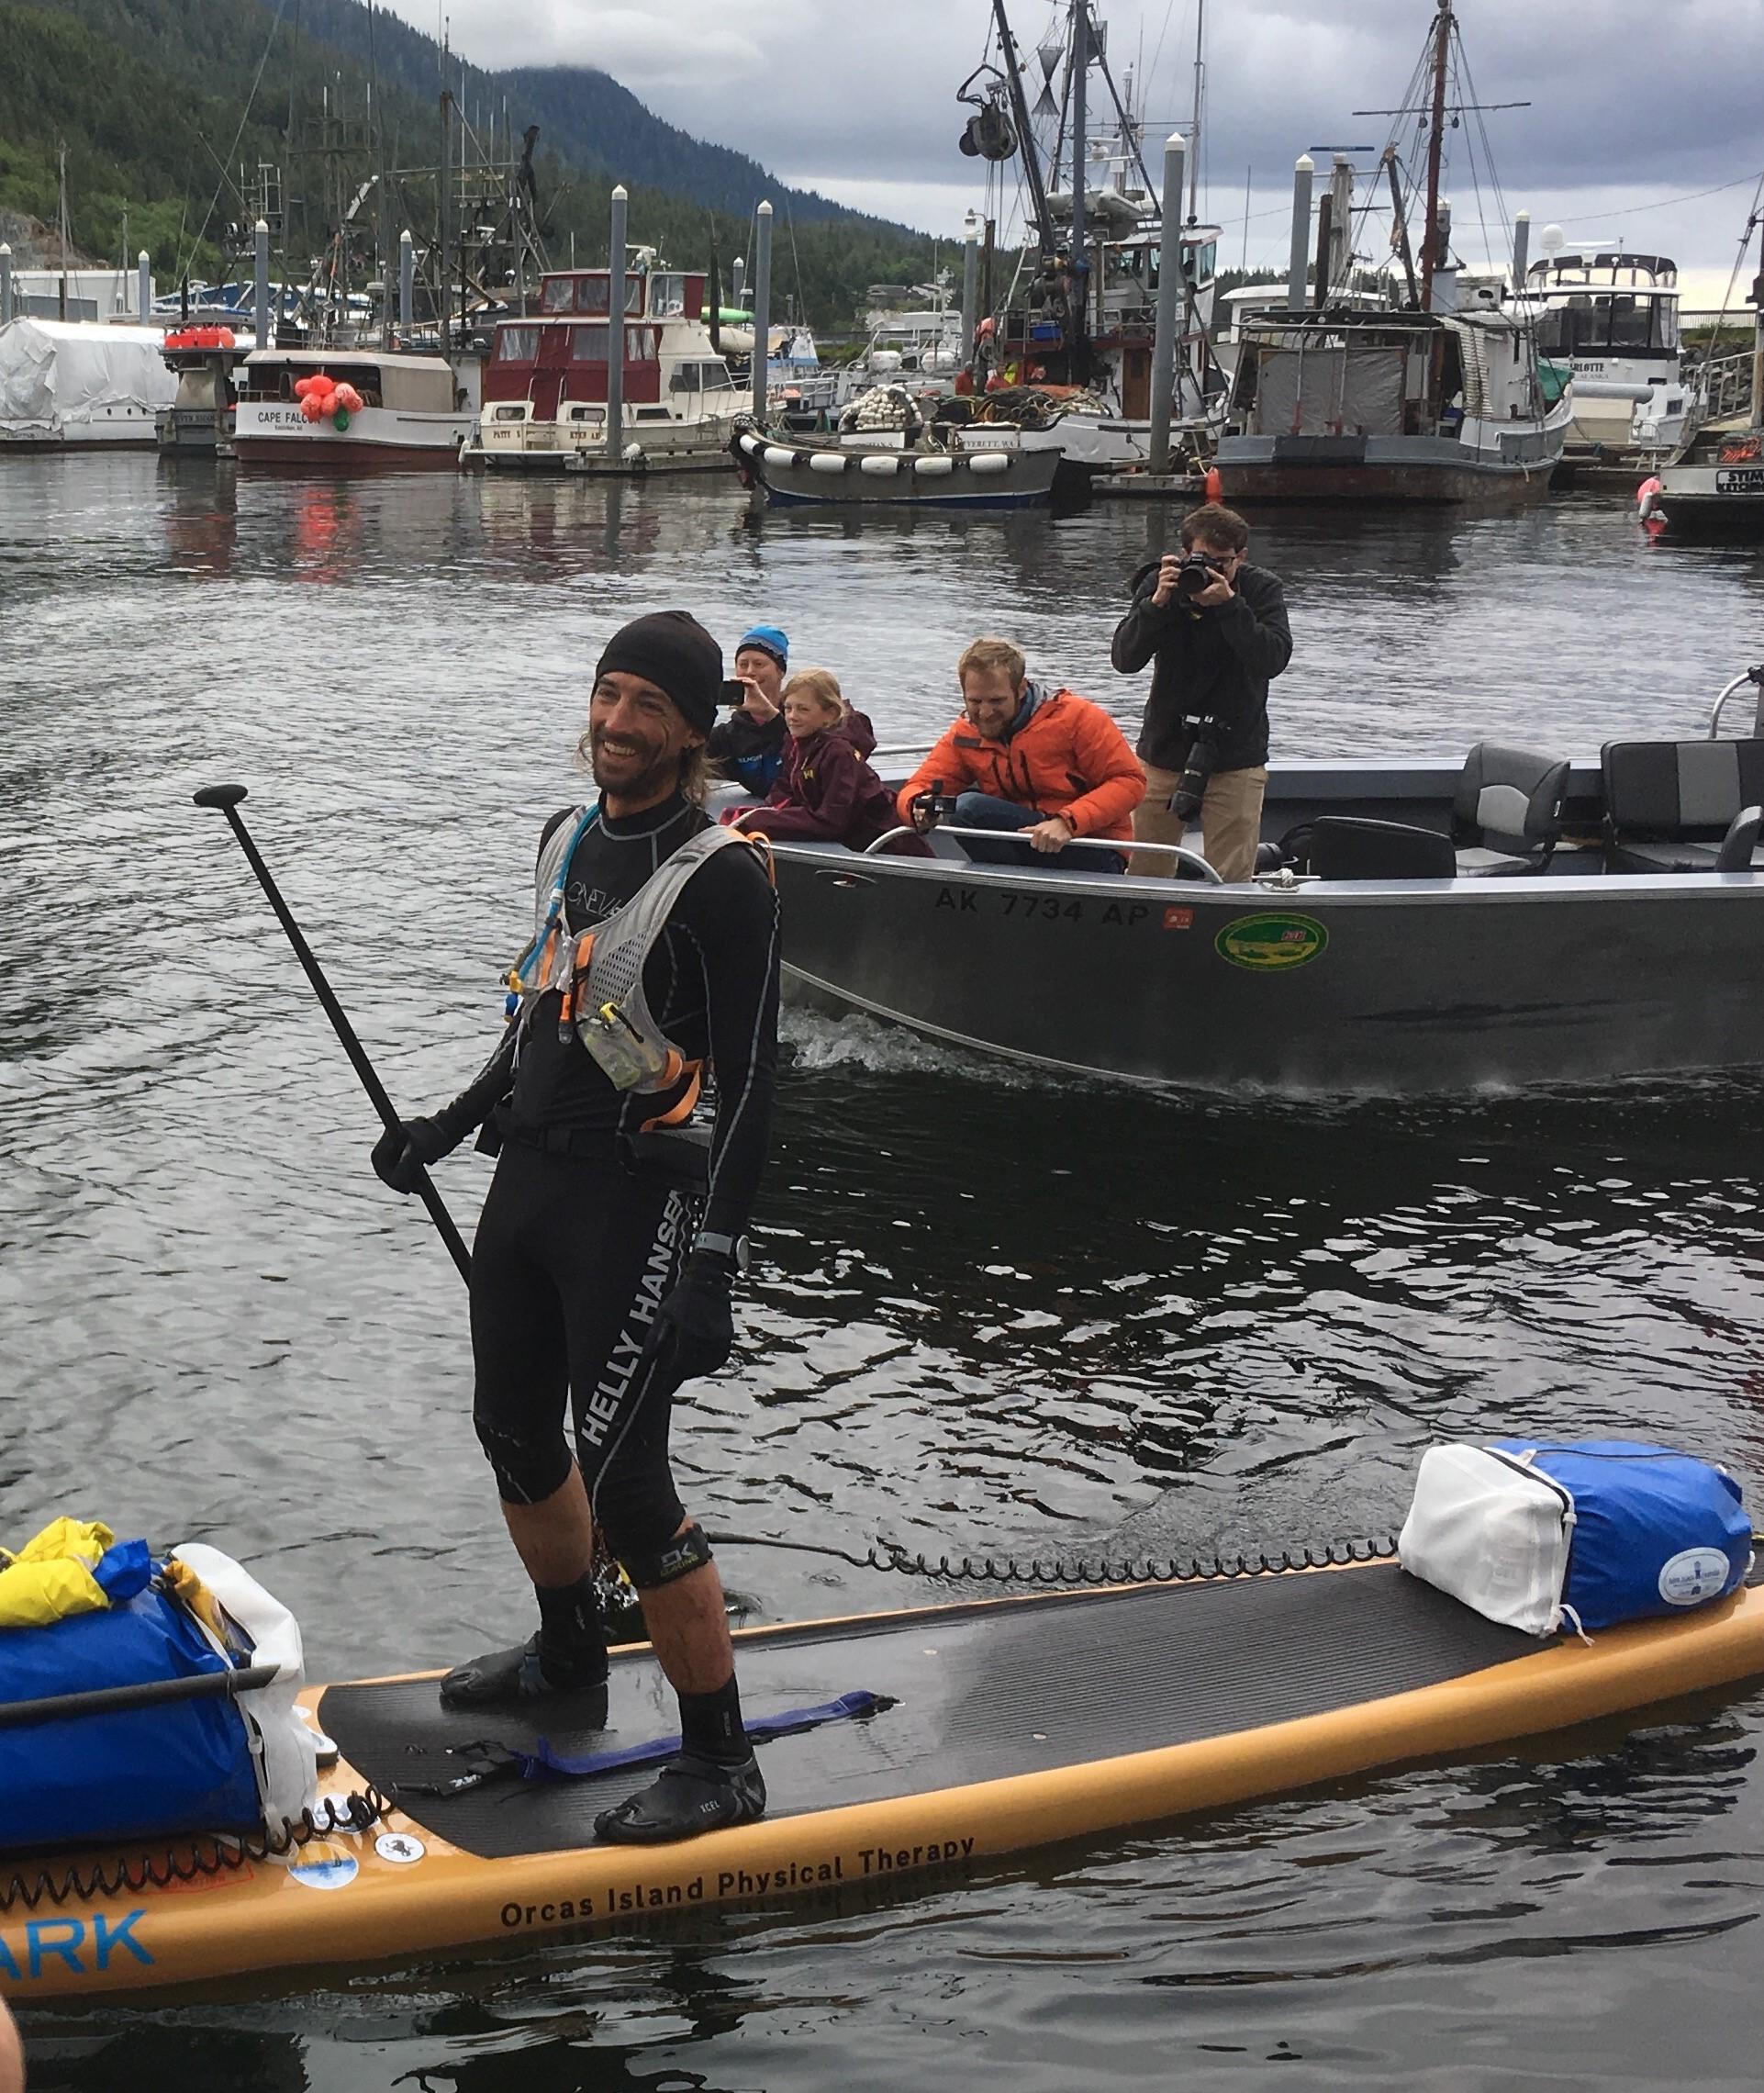 Karl Kruger arrived at Thomas Basin Boat Harbor in Ketchikan Sunday evening, becoming the first SUP finisher of the Race to Alaska. (Photo by Leila Kheiry/KRBD)